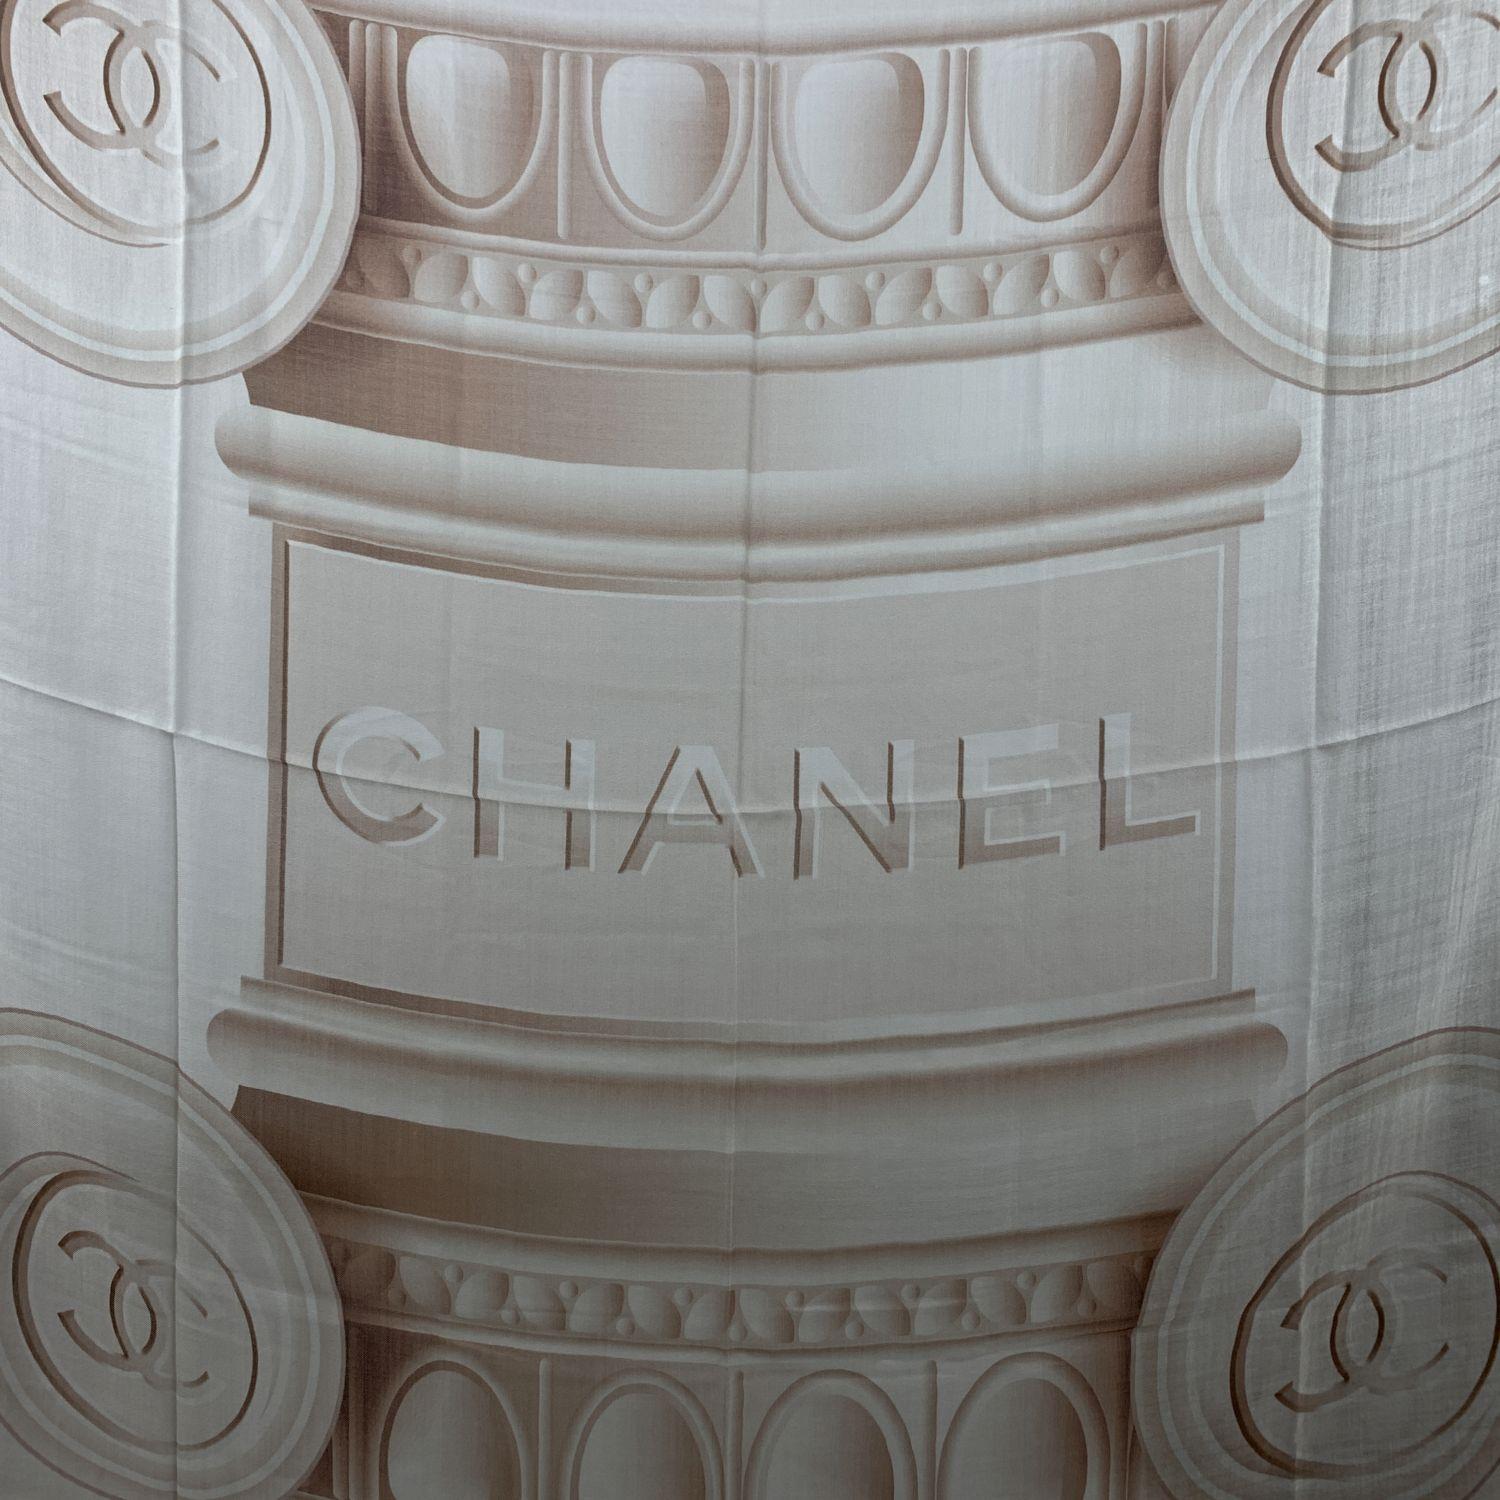 Chanel cashmere large scarf with Ionic capitals with Chanel signature pint. In beige colorway. Frayed edges. Contrast dark borders. Composition: 100% Cashmere. Measurements: 55 x 55 inches - 139.7 x 139.7 cm . Made in Italy

Details

MATERIAL: